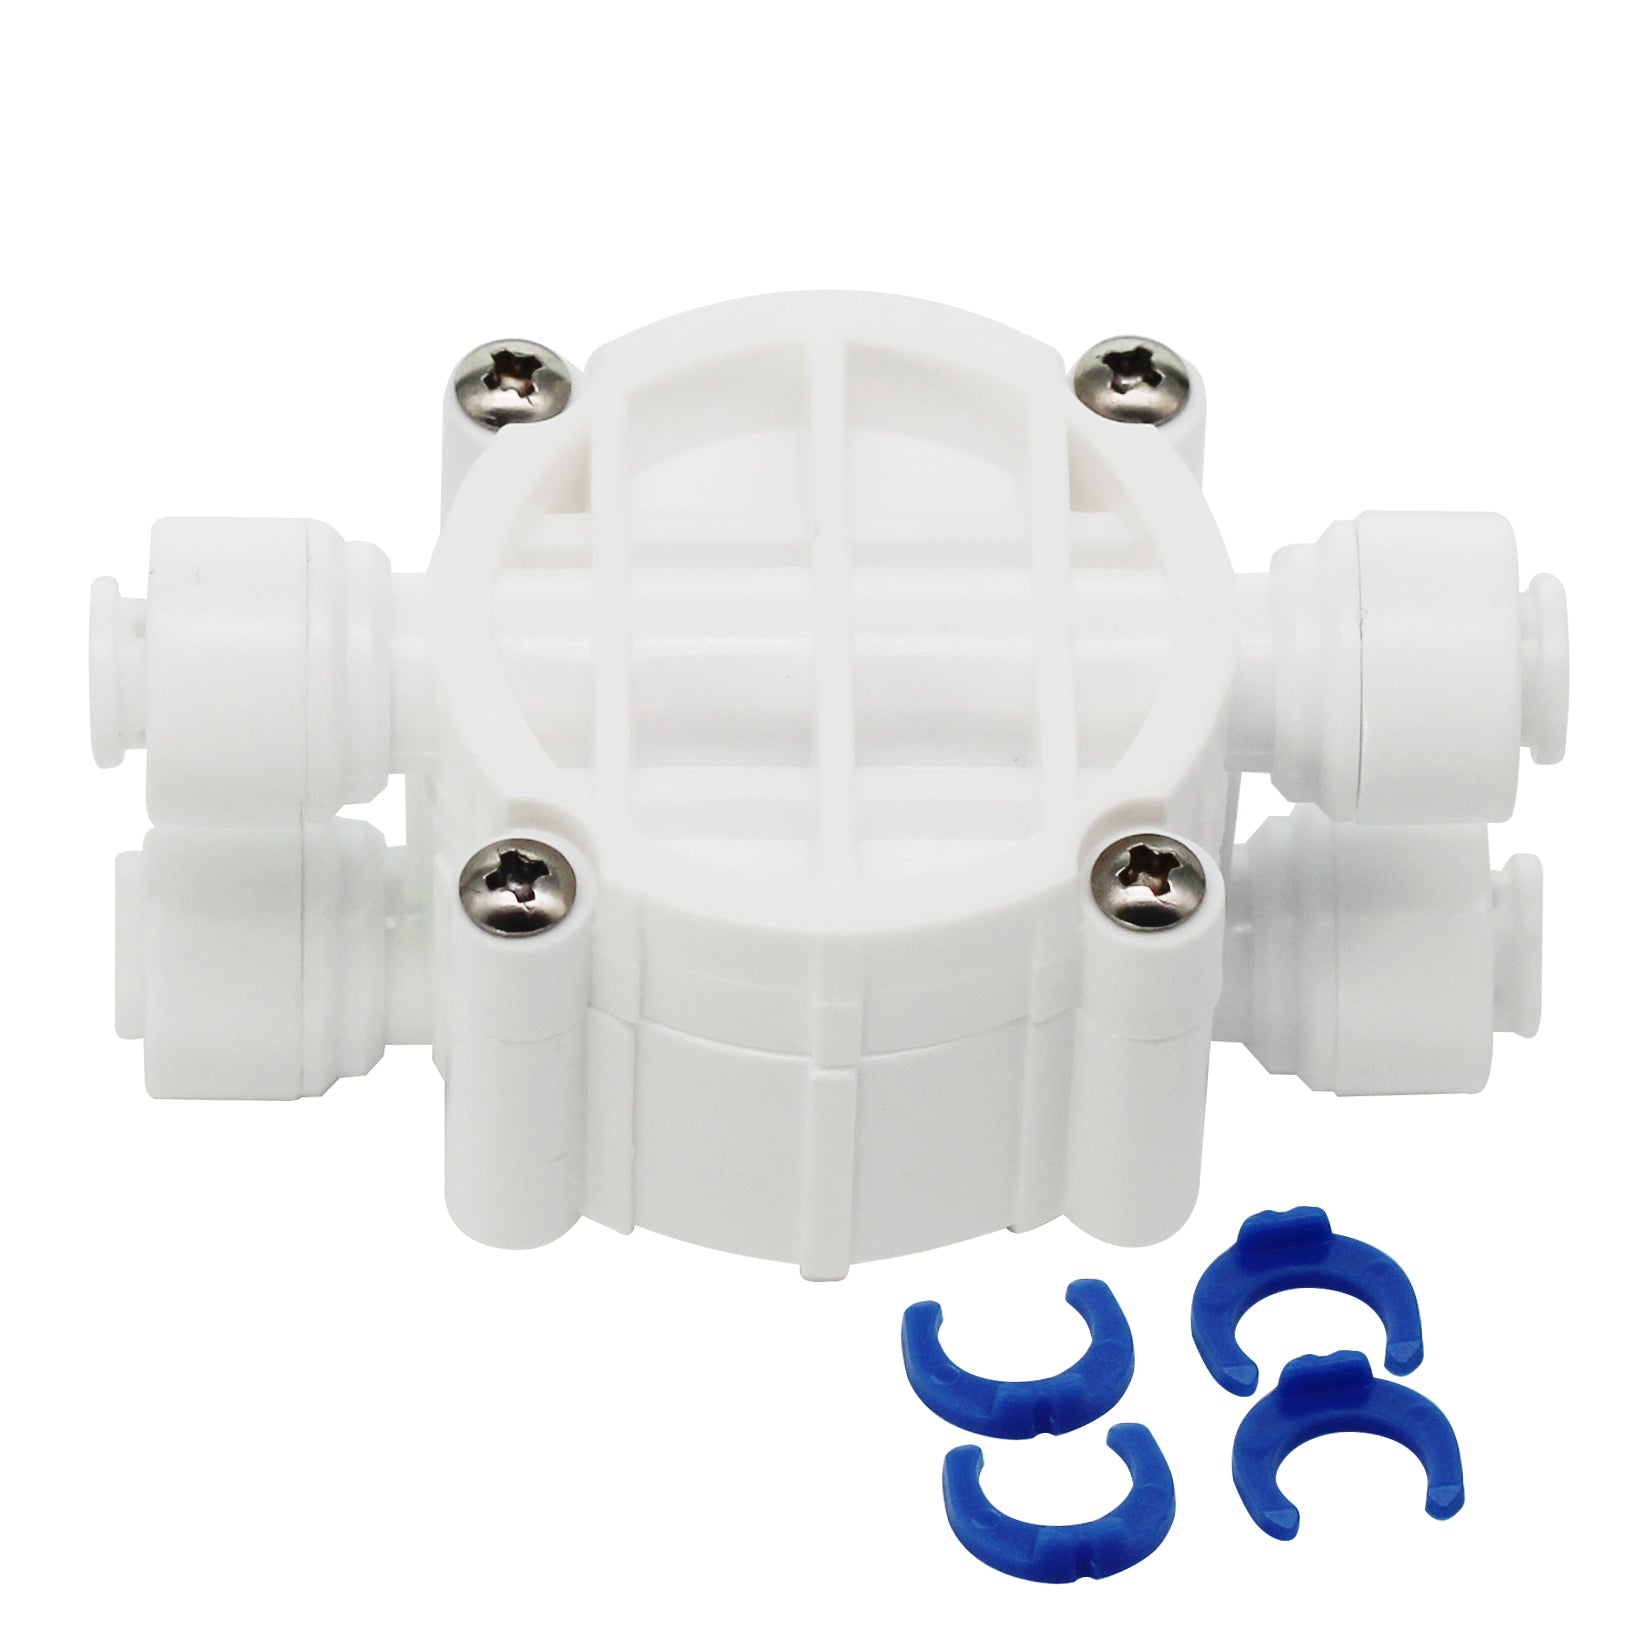 Automatic Shut Off Valve Quick Connect 1/4 Inch Fittings – Express Water